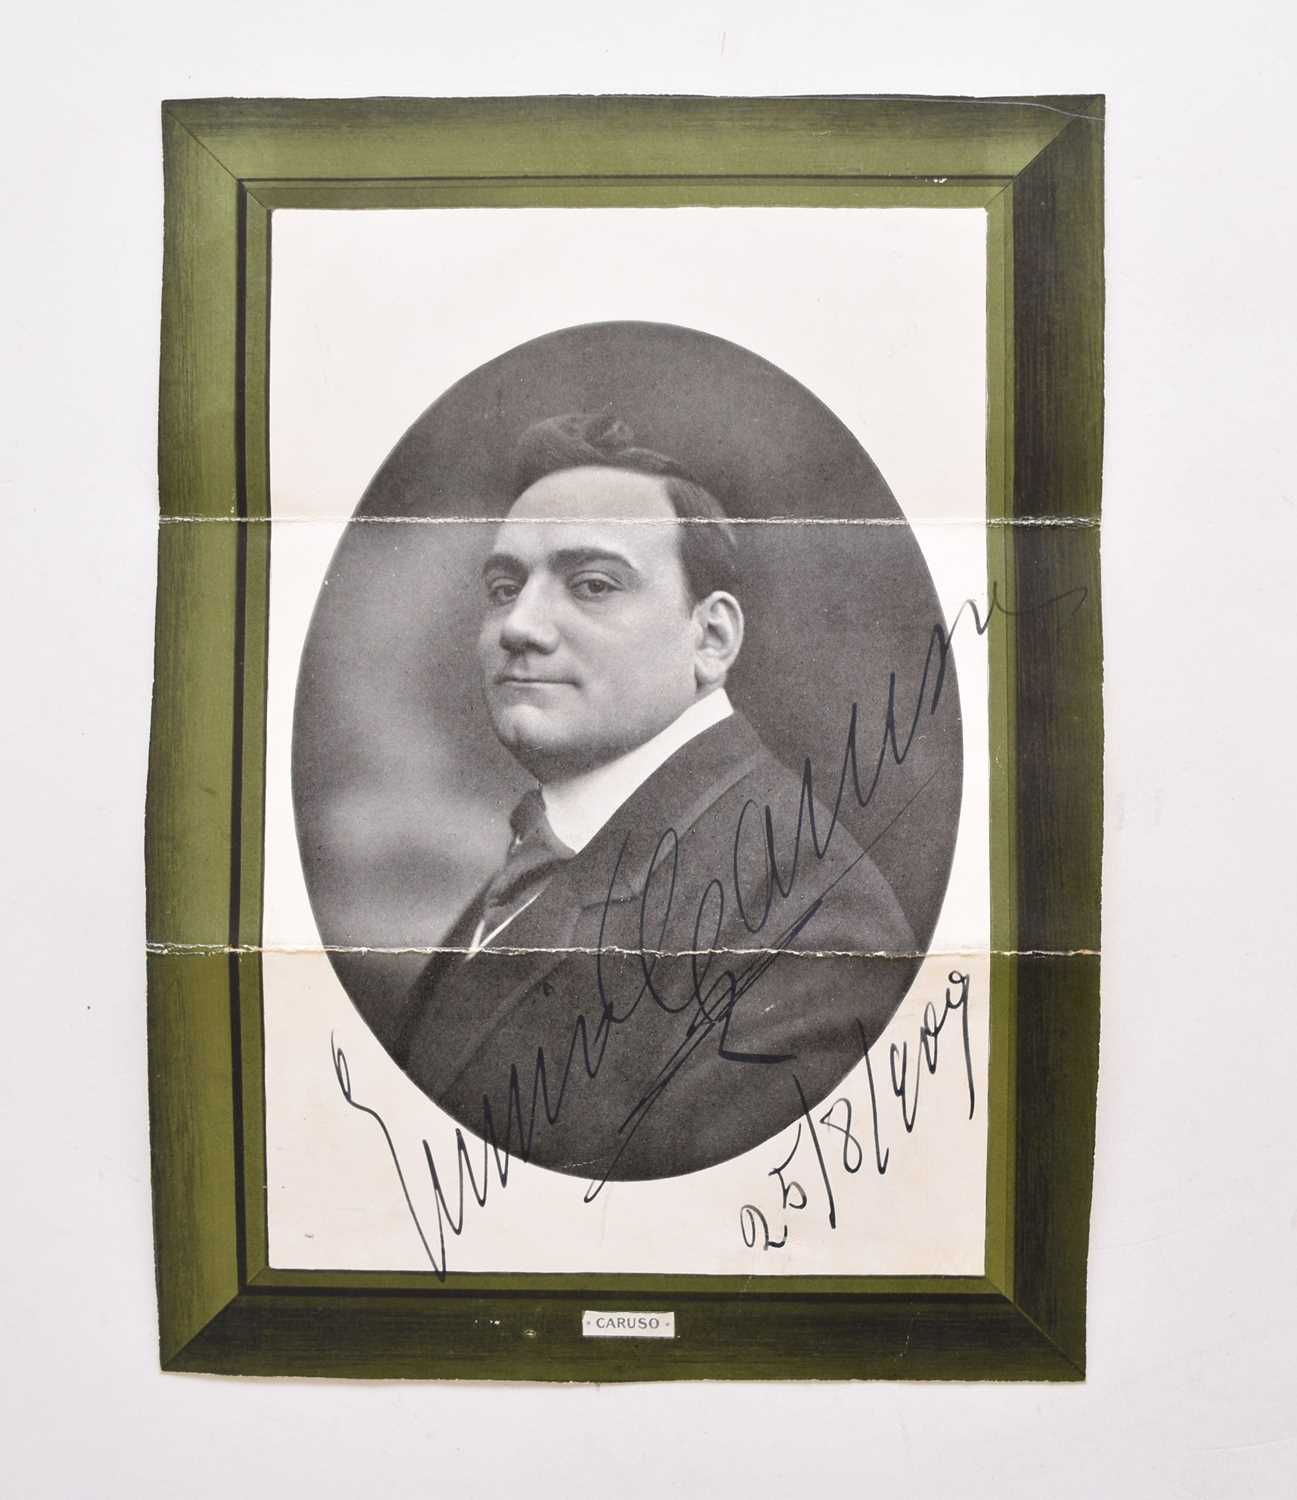 Lot 1064 - CARUSO, Enrico (1873-1921), Opera singer.  Printed photograph boldly signed and dated 25/8/1909.